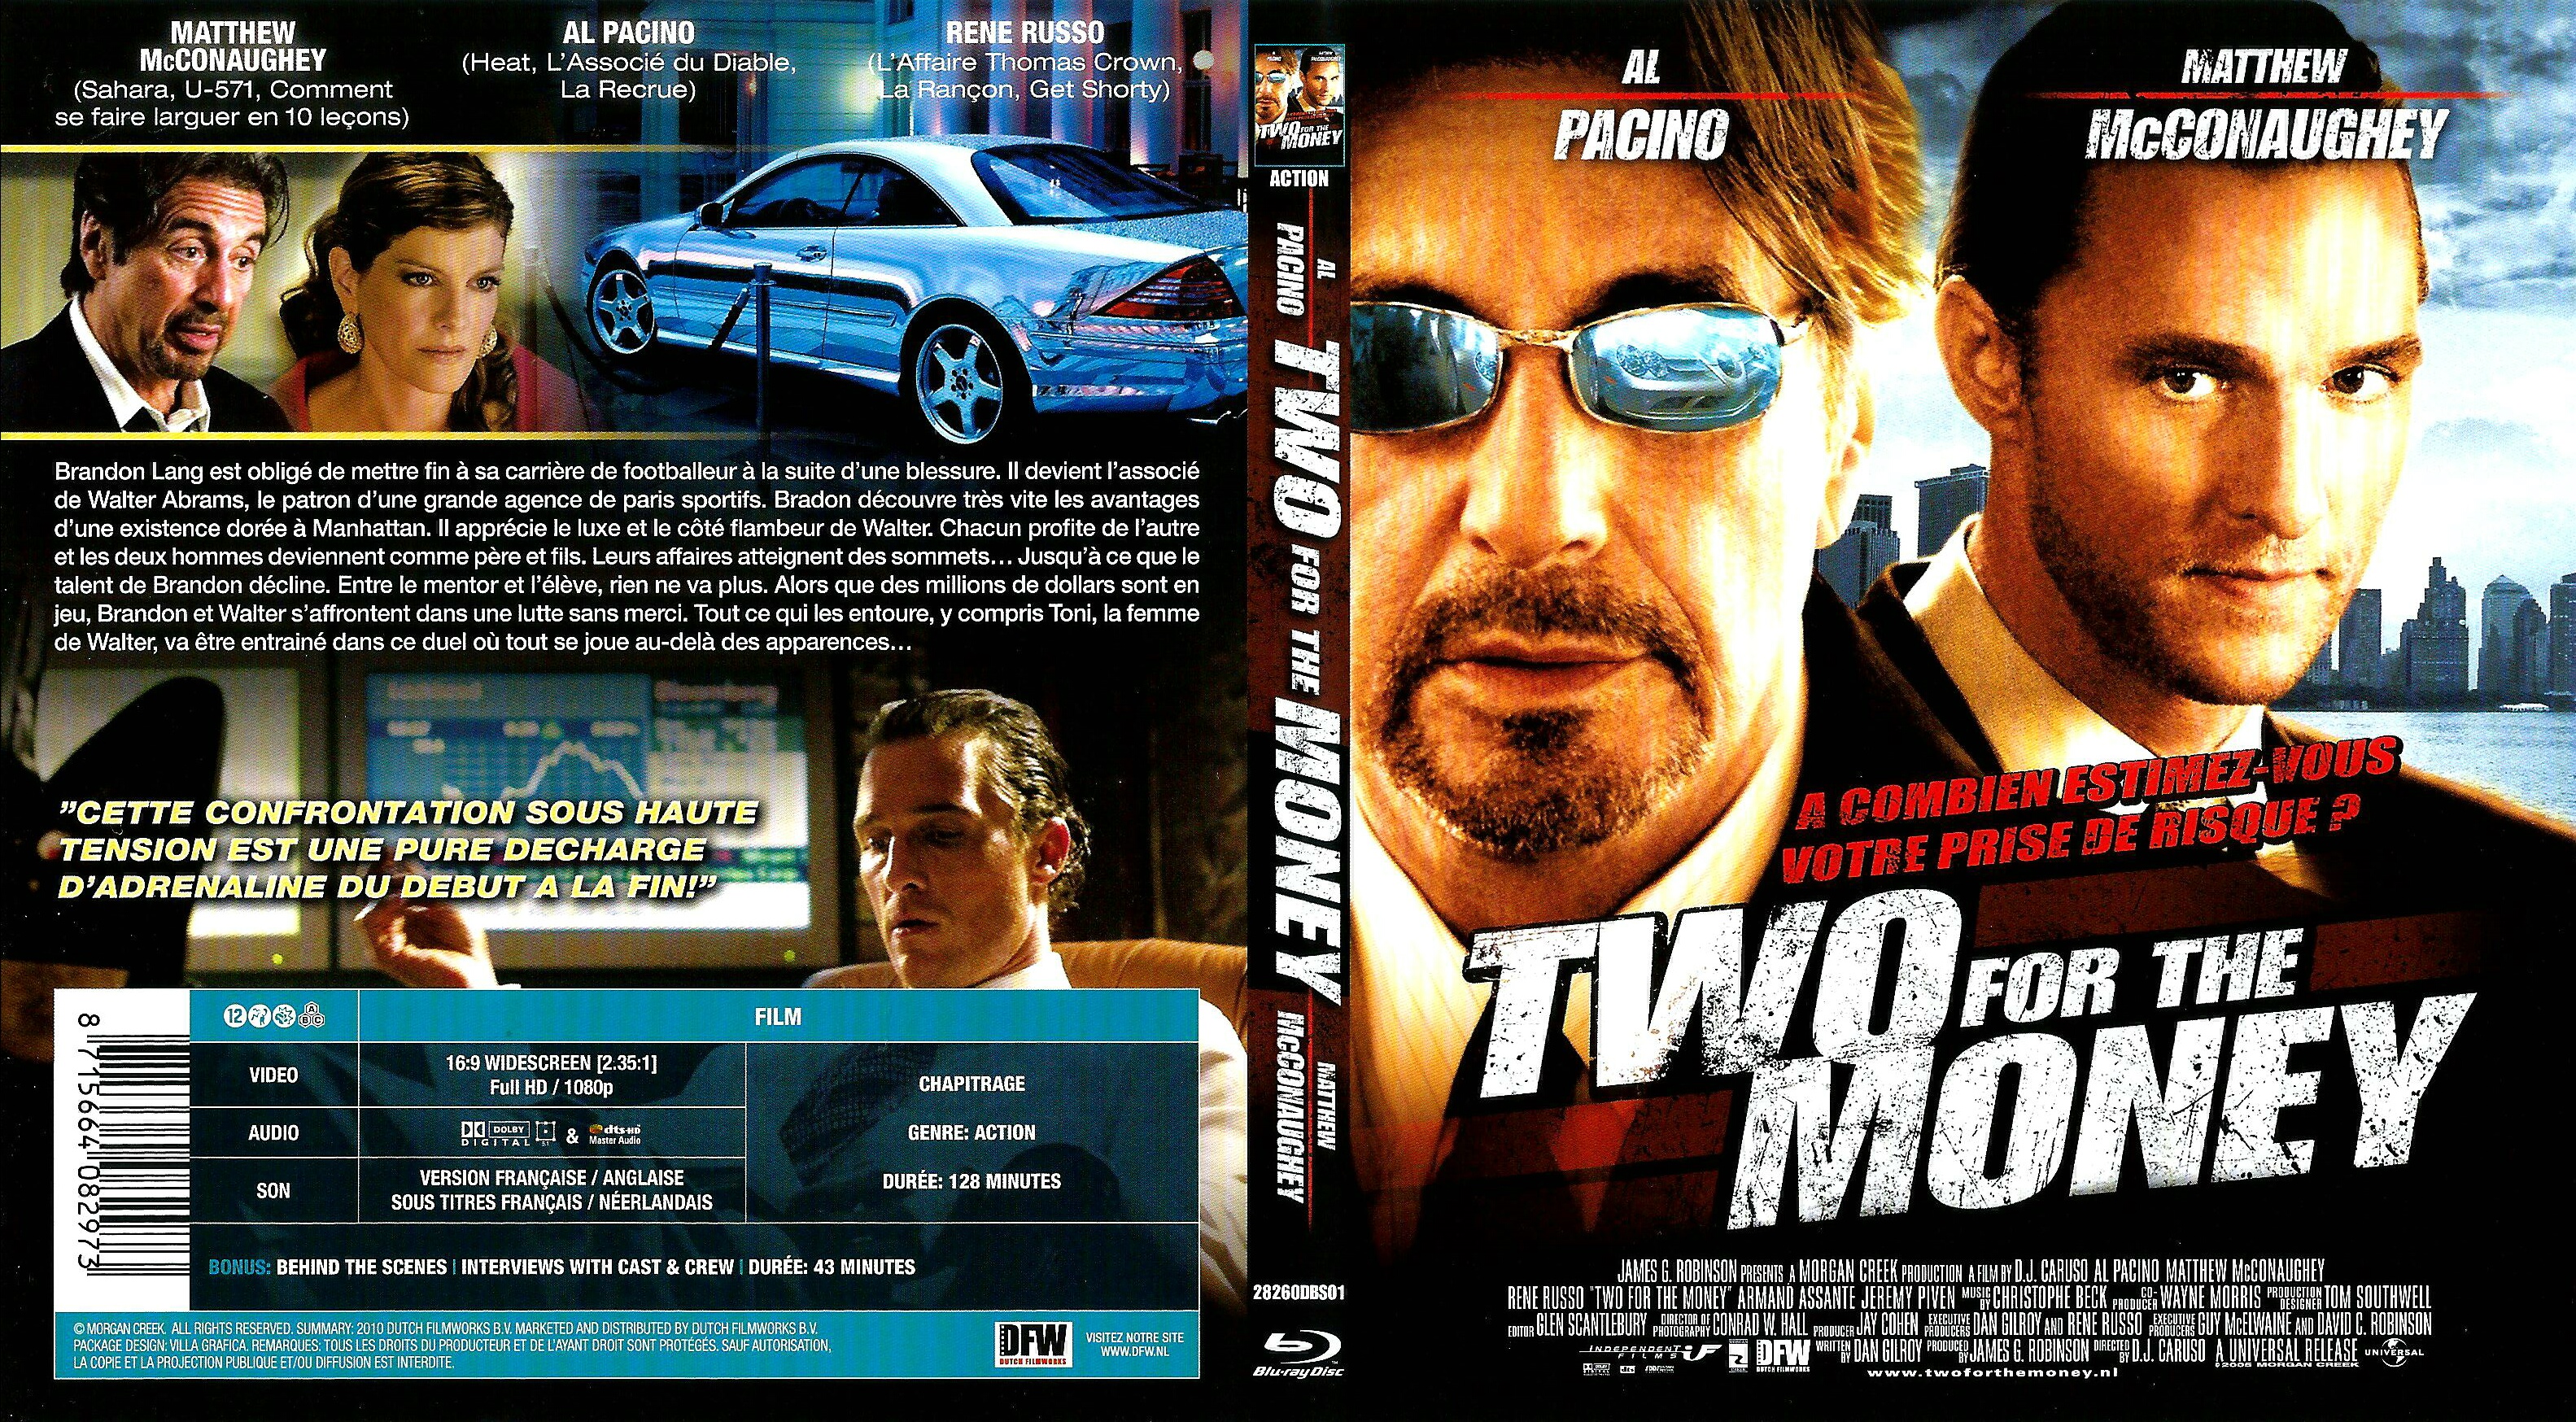 Jaquette DVD Two for the money (BLU-RAY)